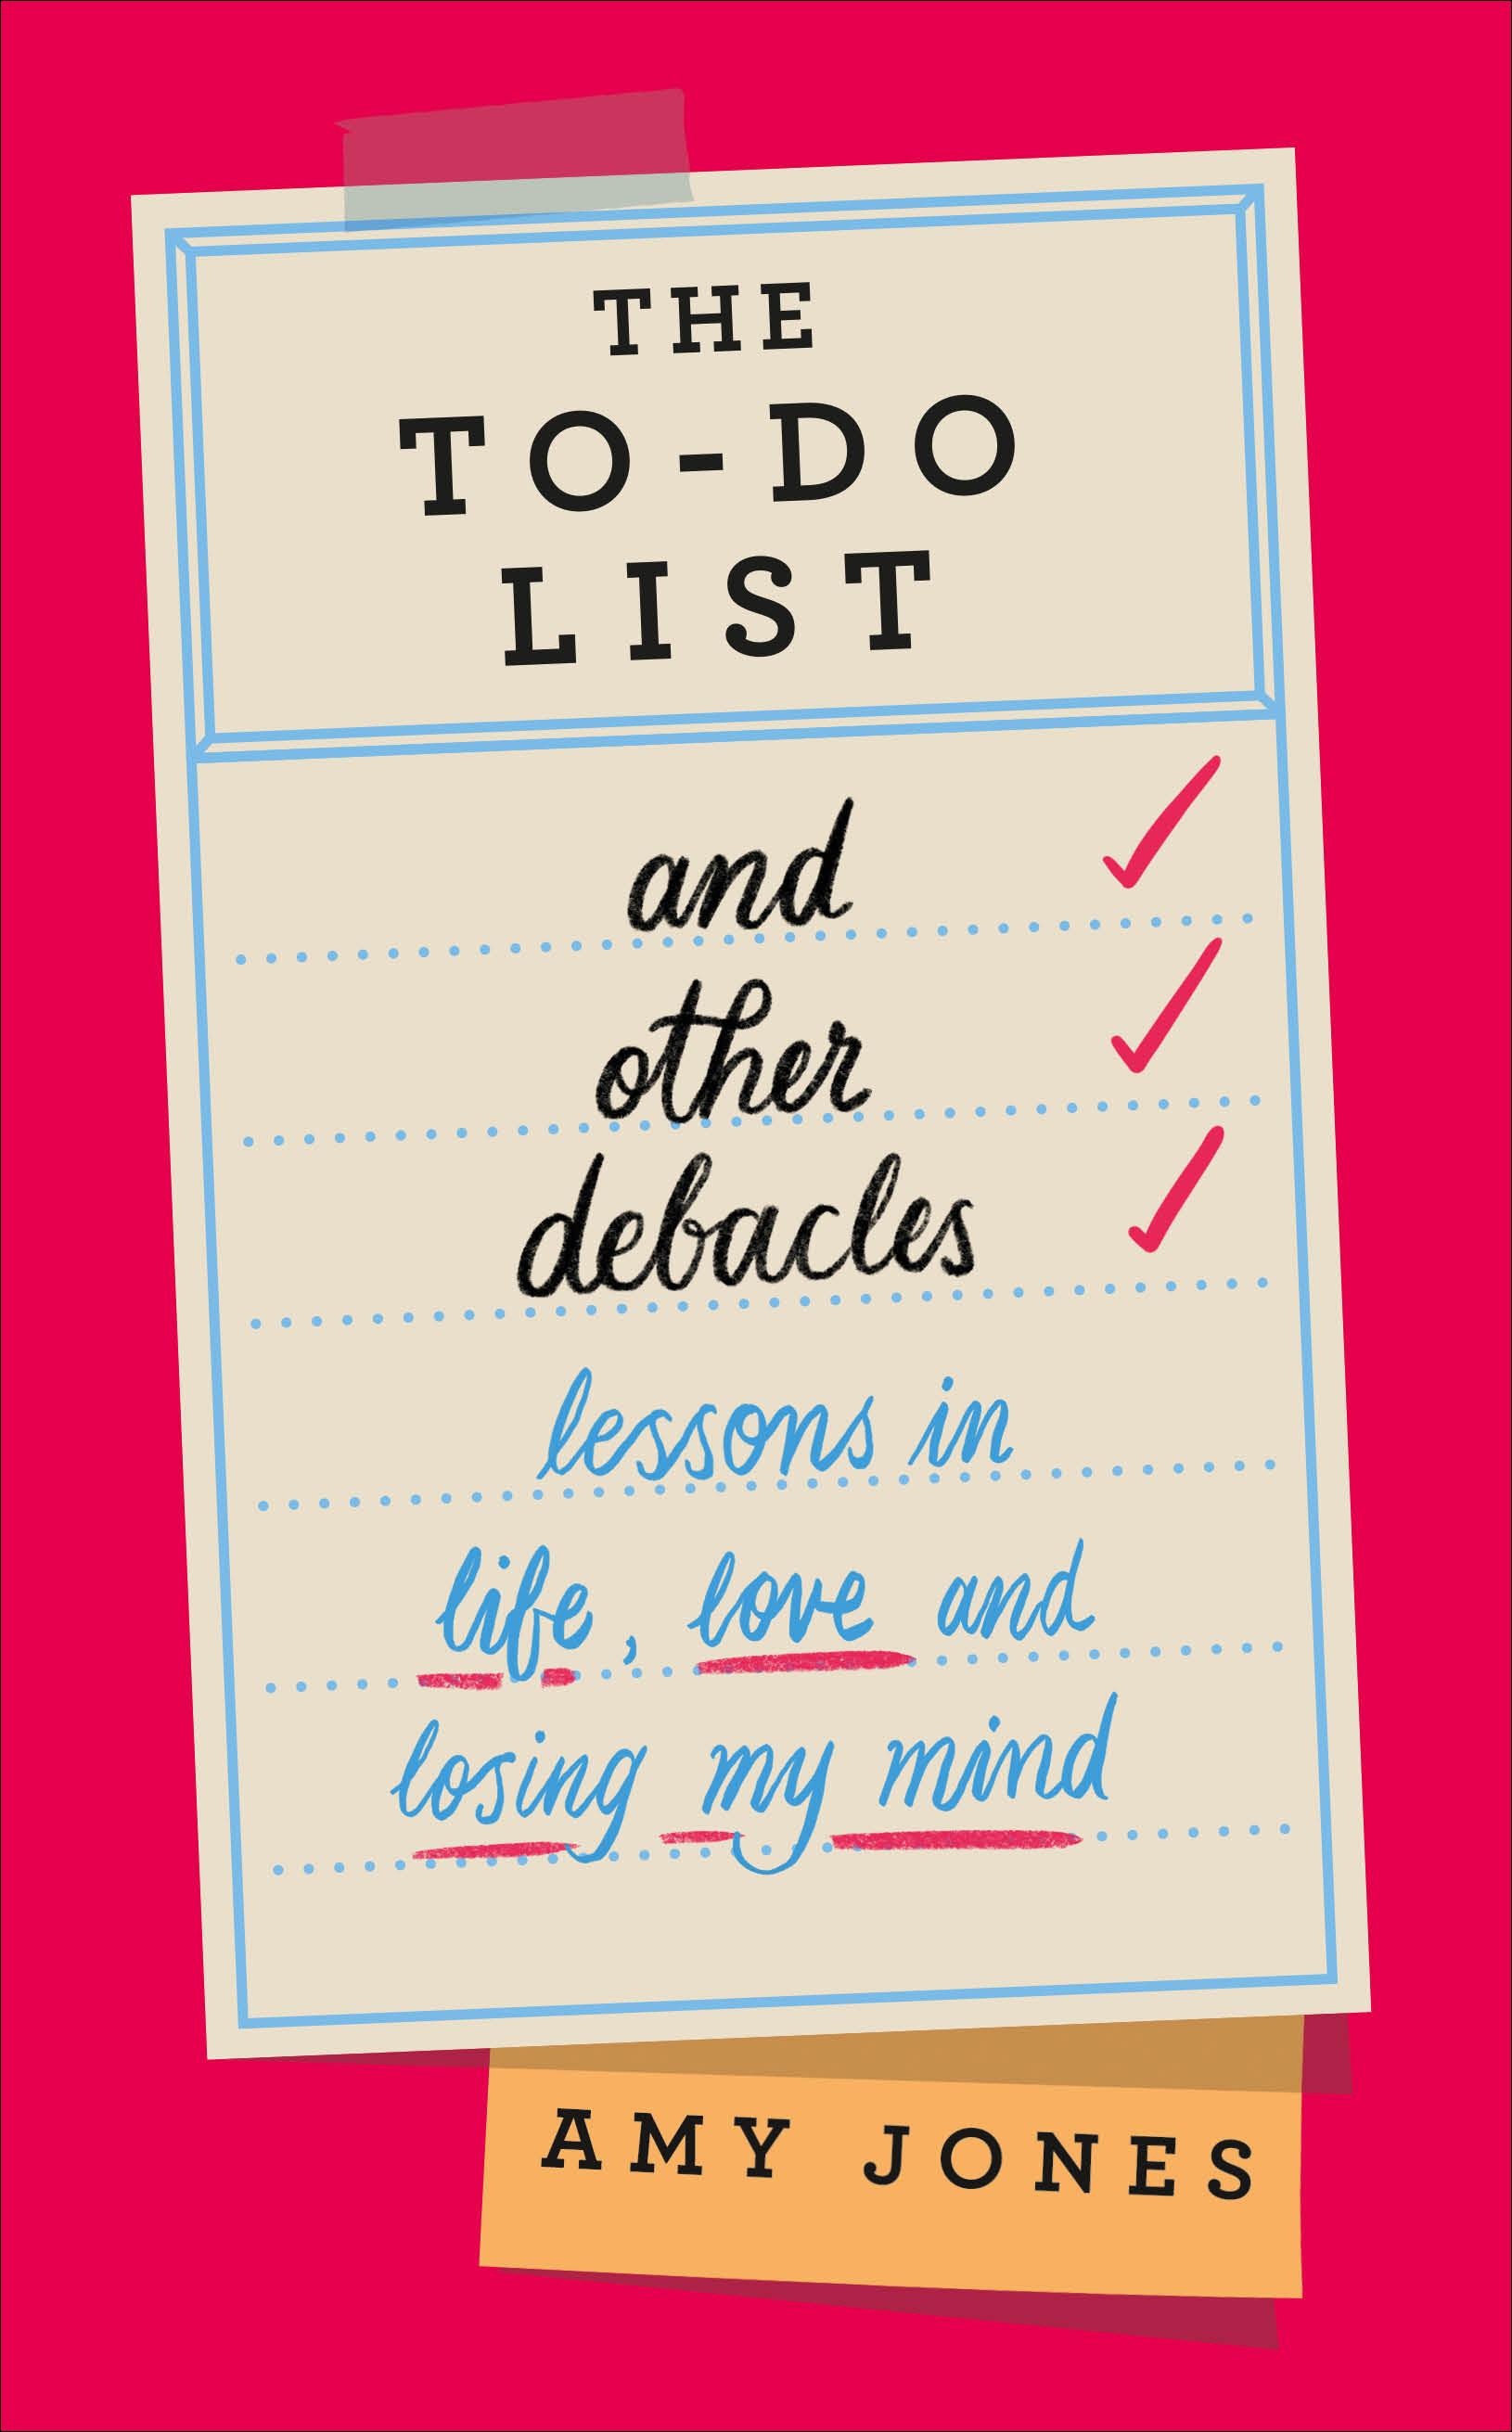 To-Do List and Other Debacles - Amy Jones